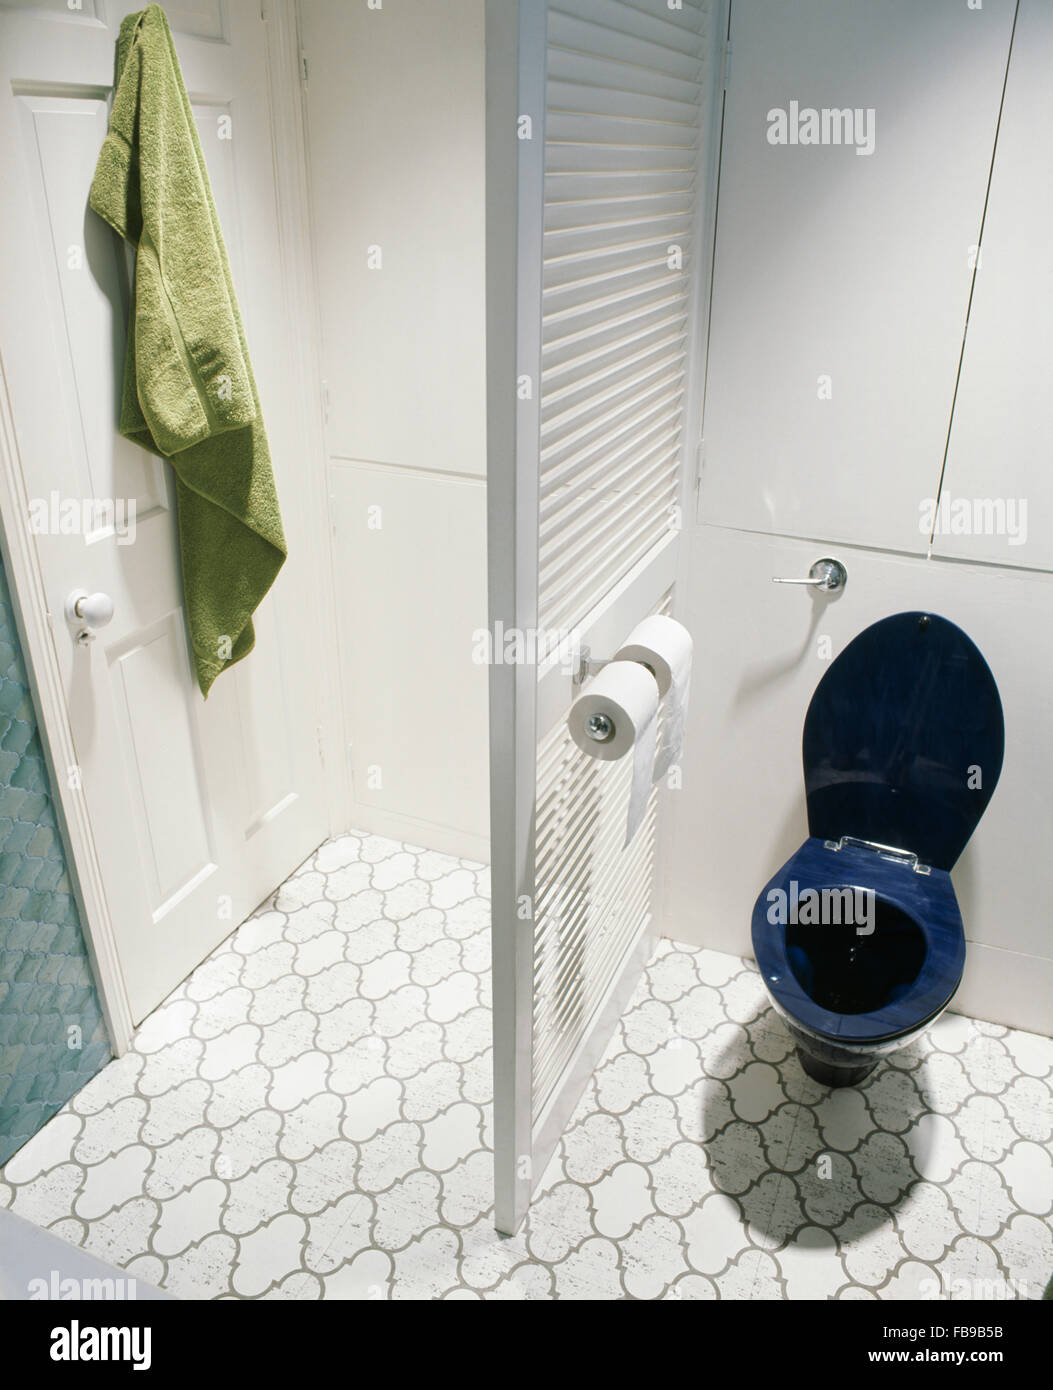 Blue toilet and louvre room divider in seventies bathroom with white tiled floor Stock Photo